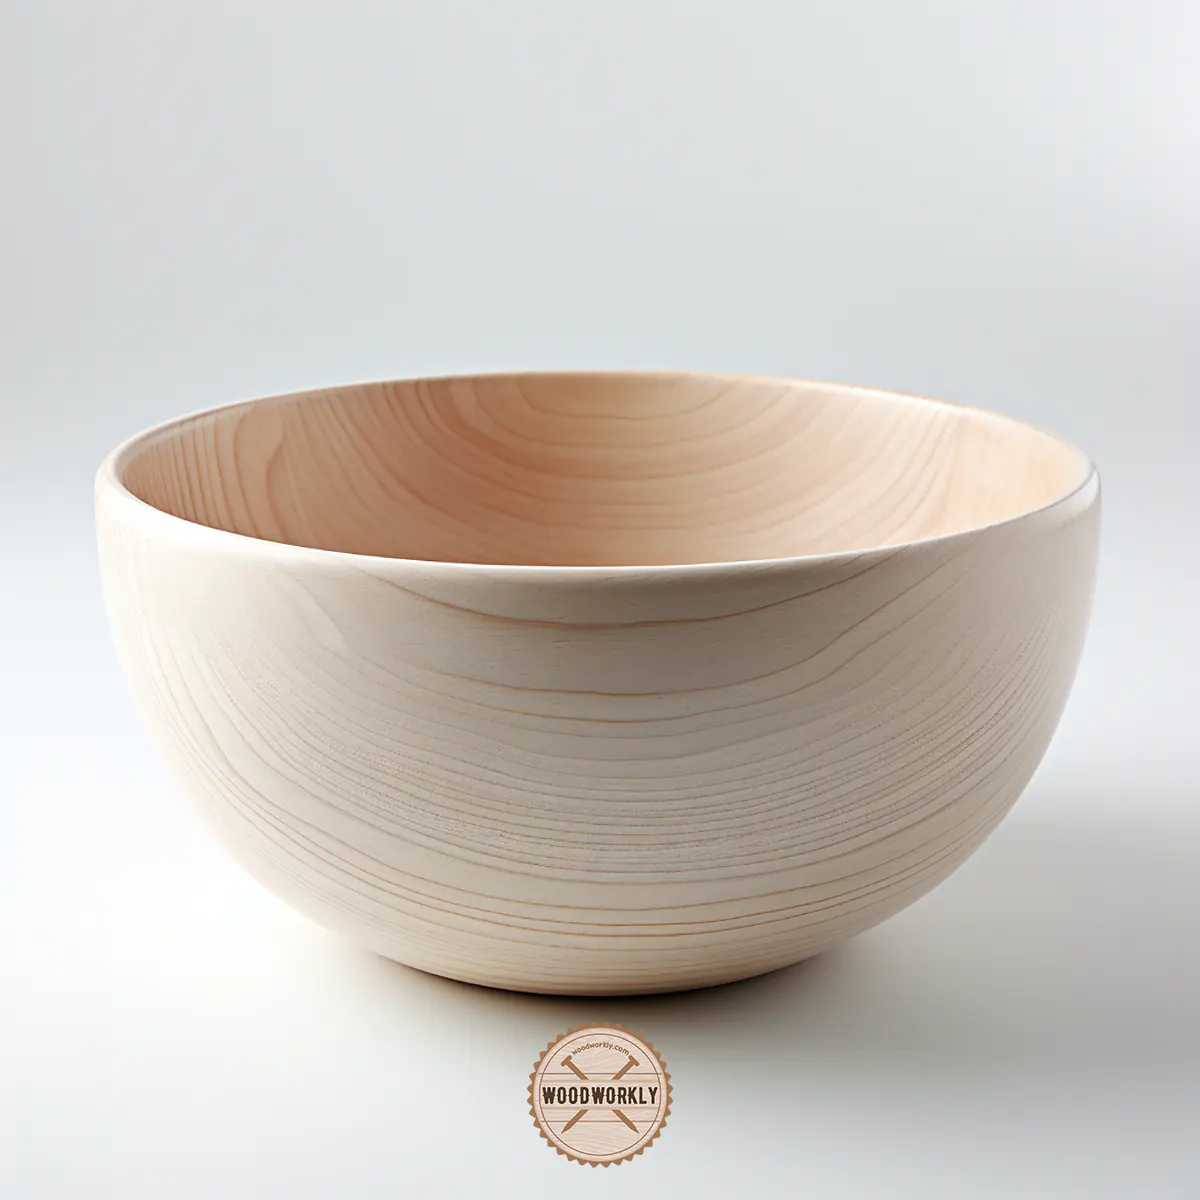 Basswood kitchen bowl stained with clear finish